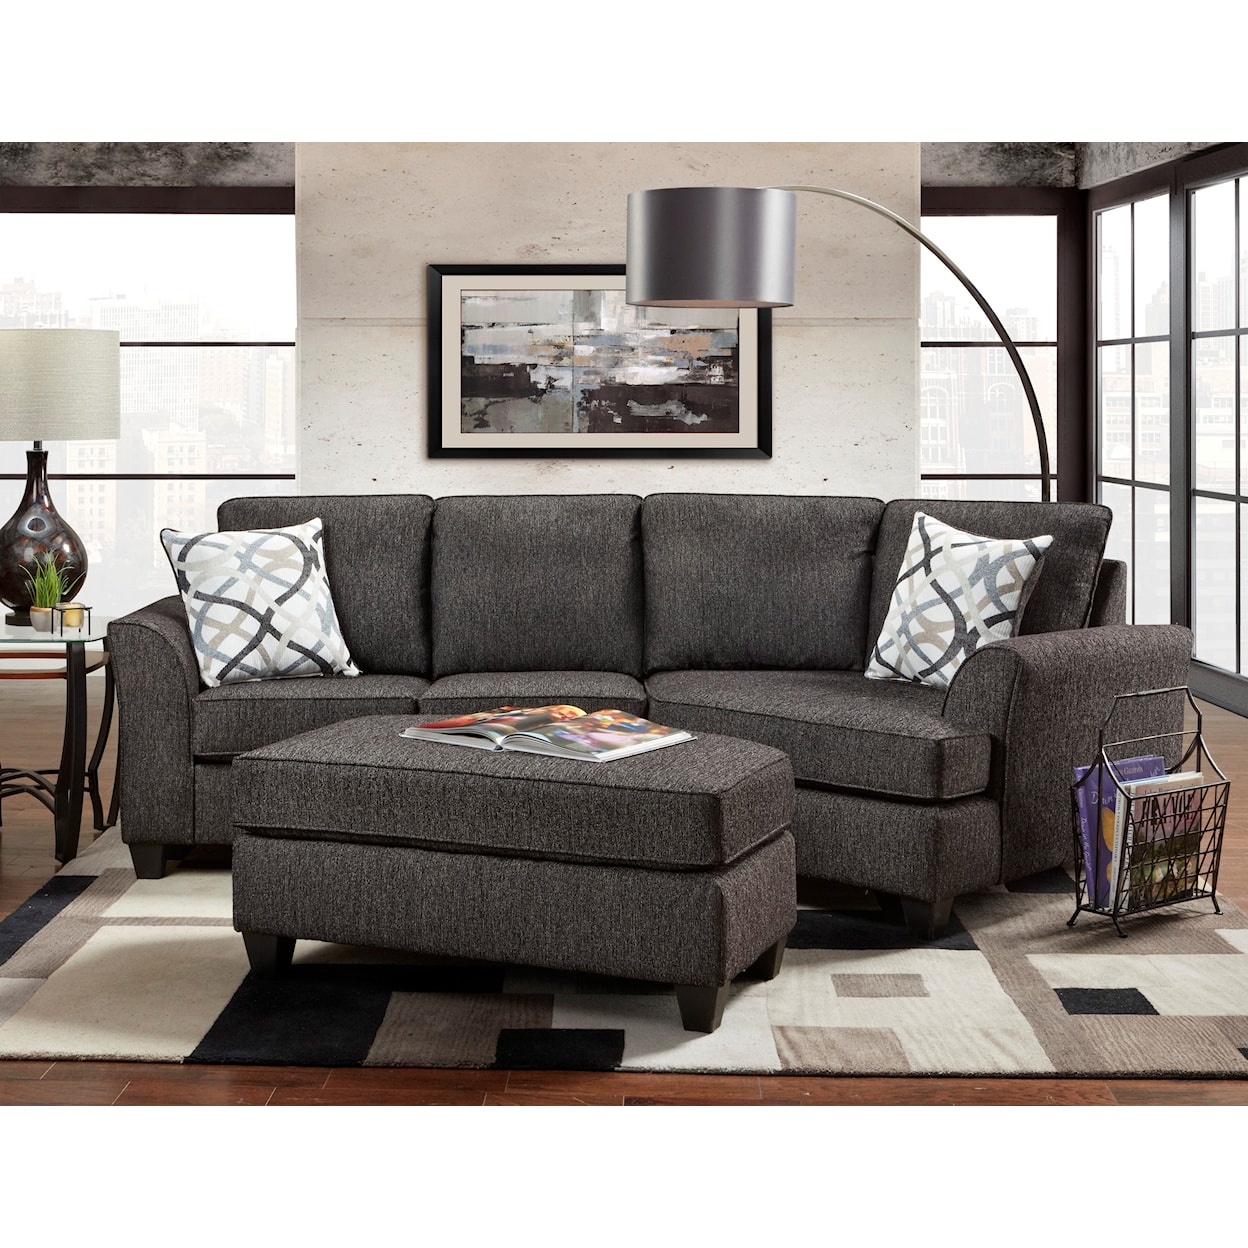 Behold Home 5200 Tuxedo Sofa Cuddler with Exposed Wooden Legs